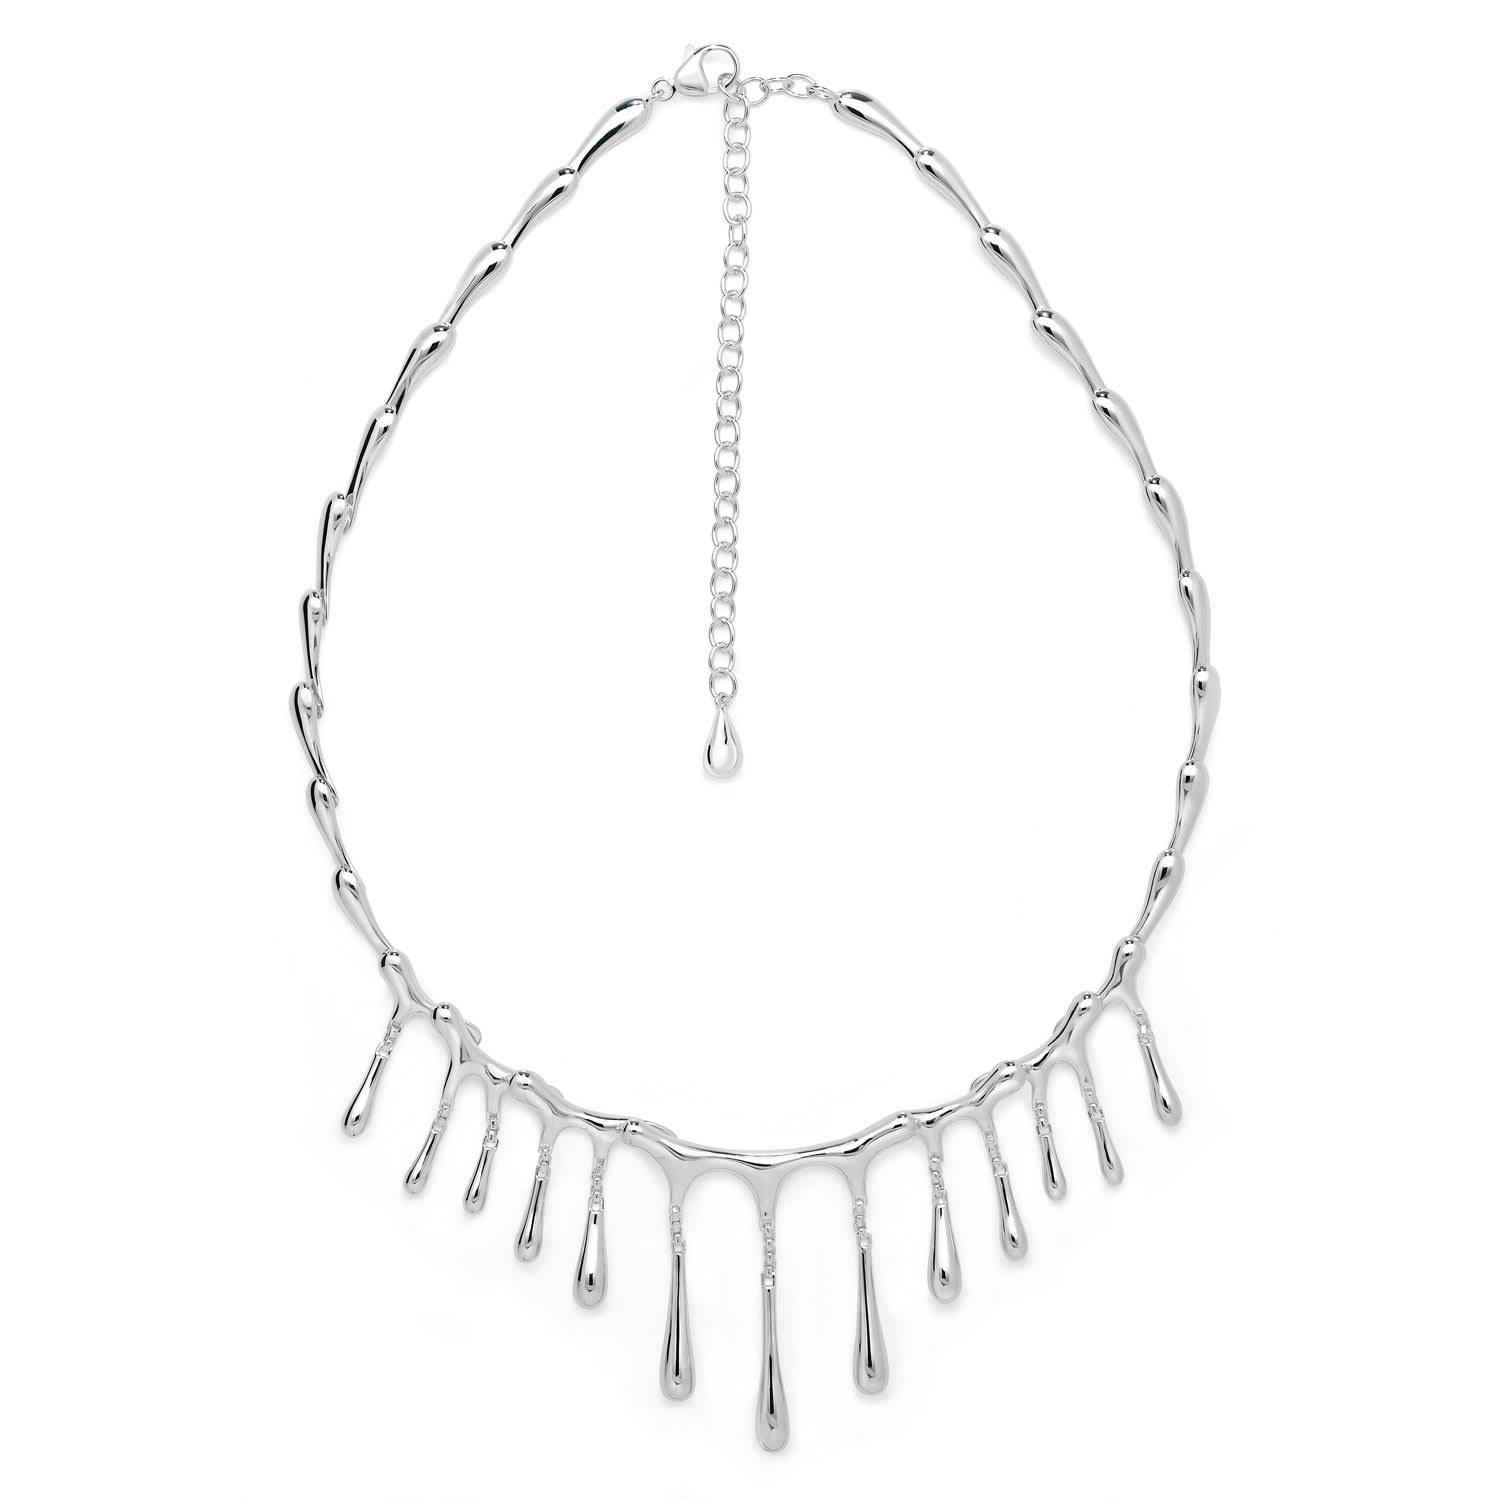 Lucy Quartermaine Women's Sterling Silver Short Multi Drip Necklace, Award Winning Designer Jewellery By Lucy Quarterm